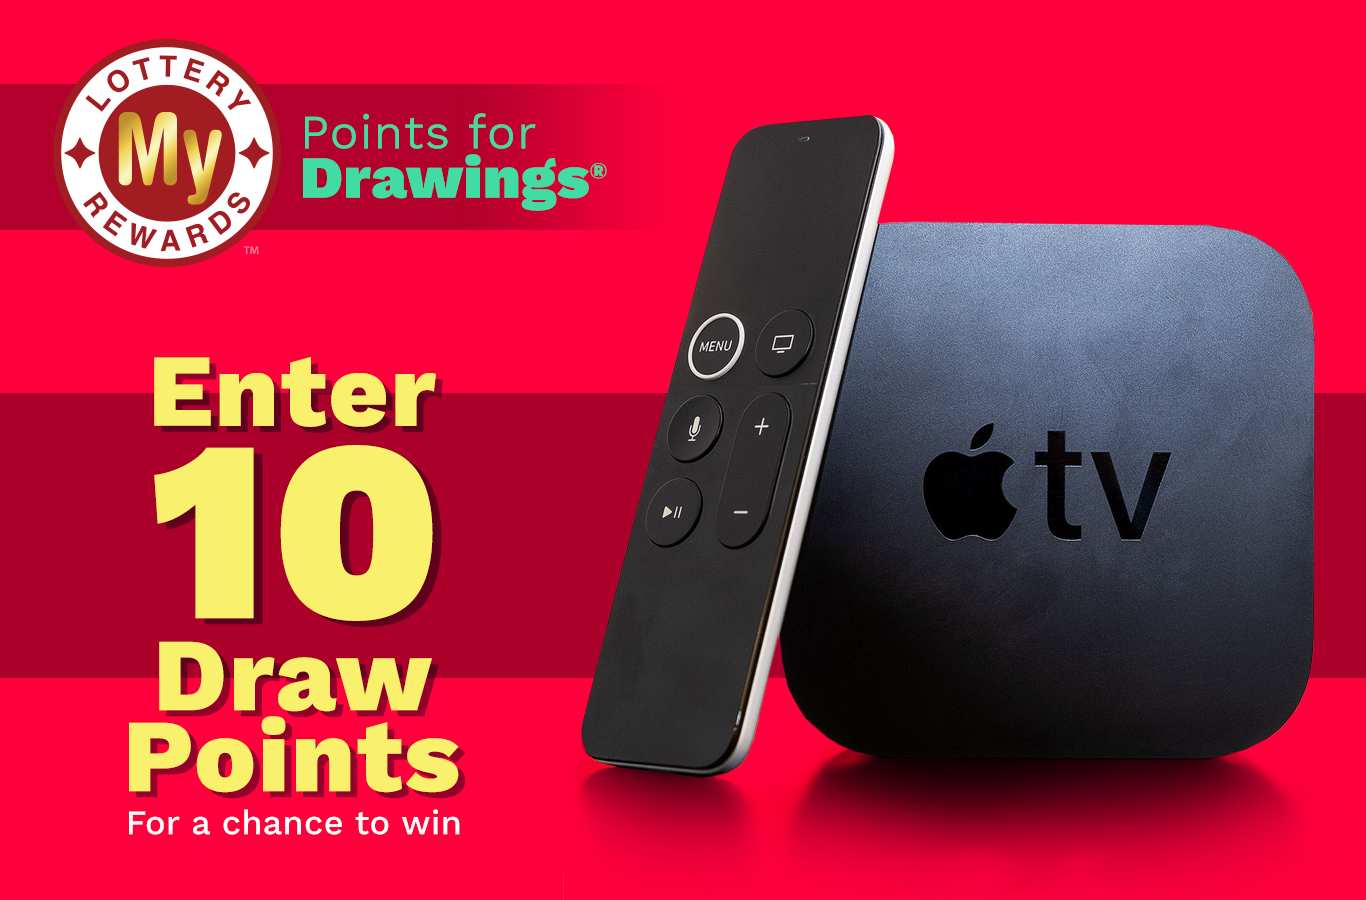 Here's your chance to win an Apple TV! Enter by Monday, April 4th.